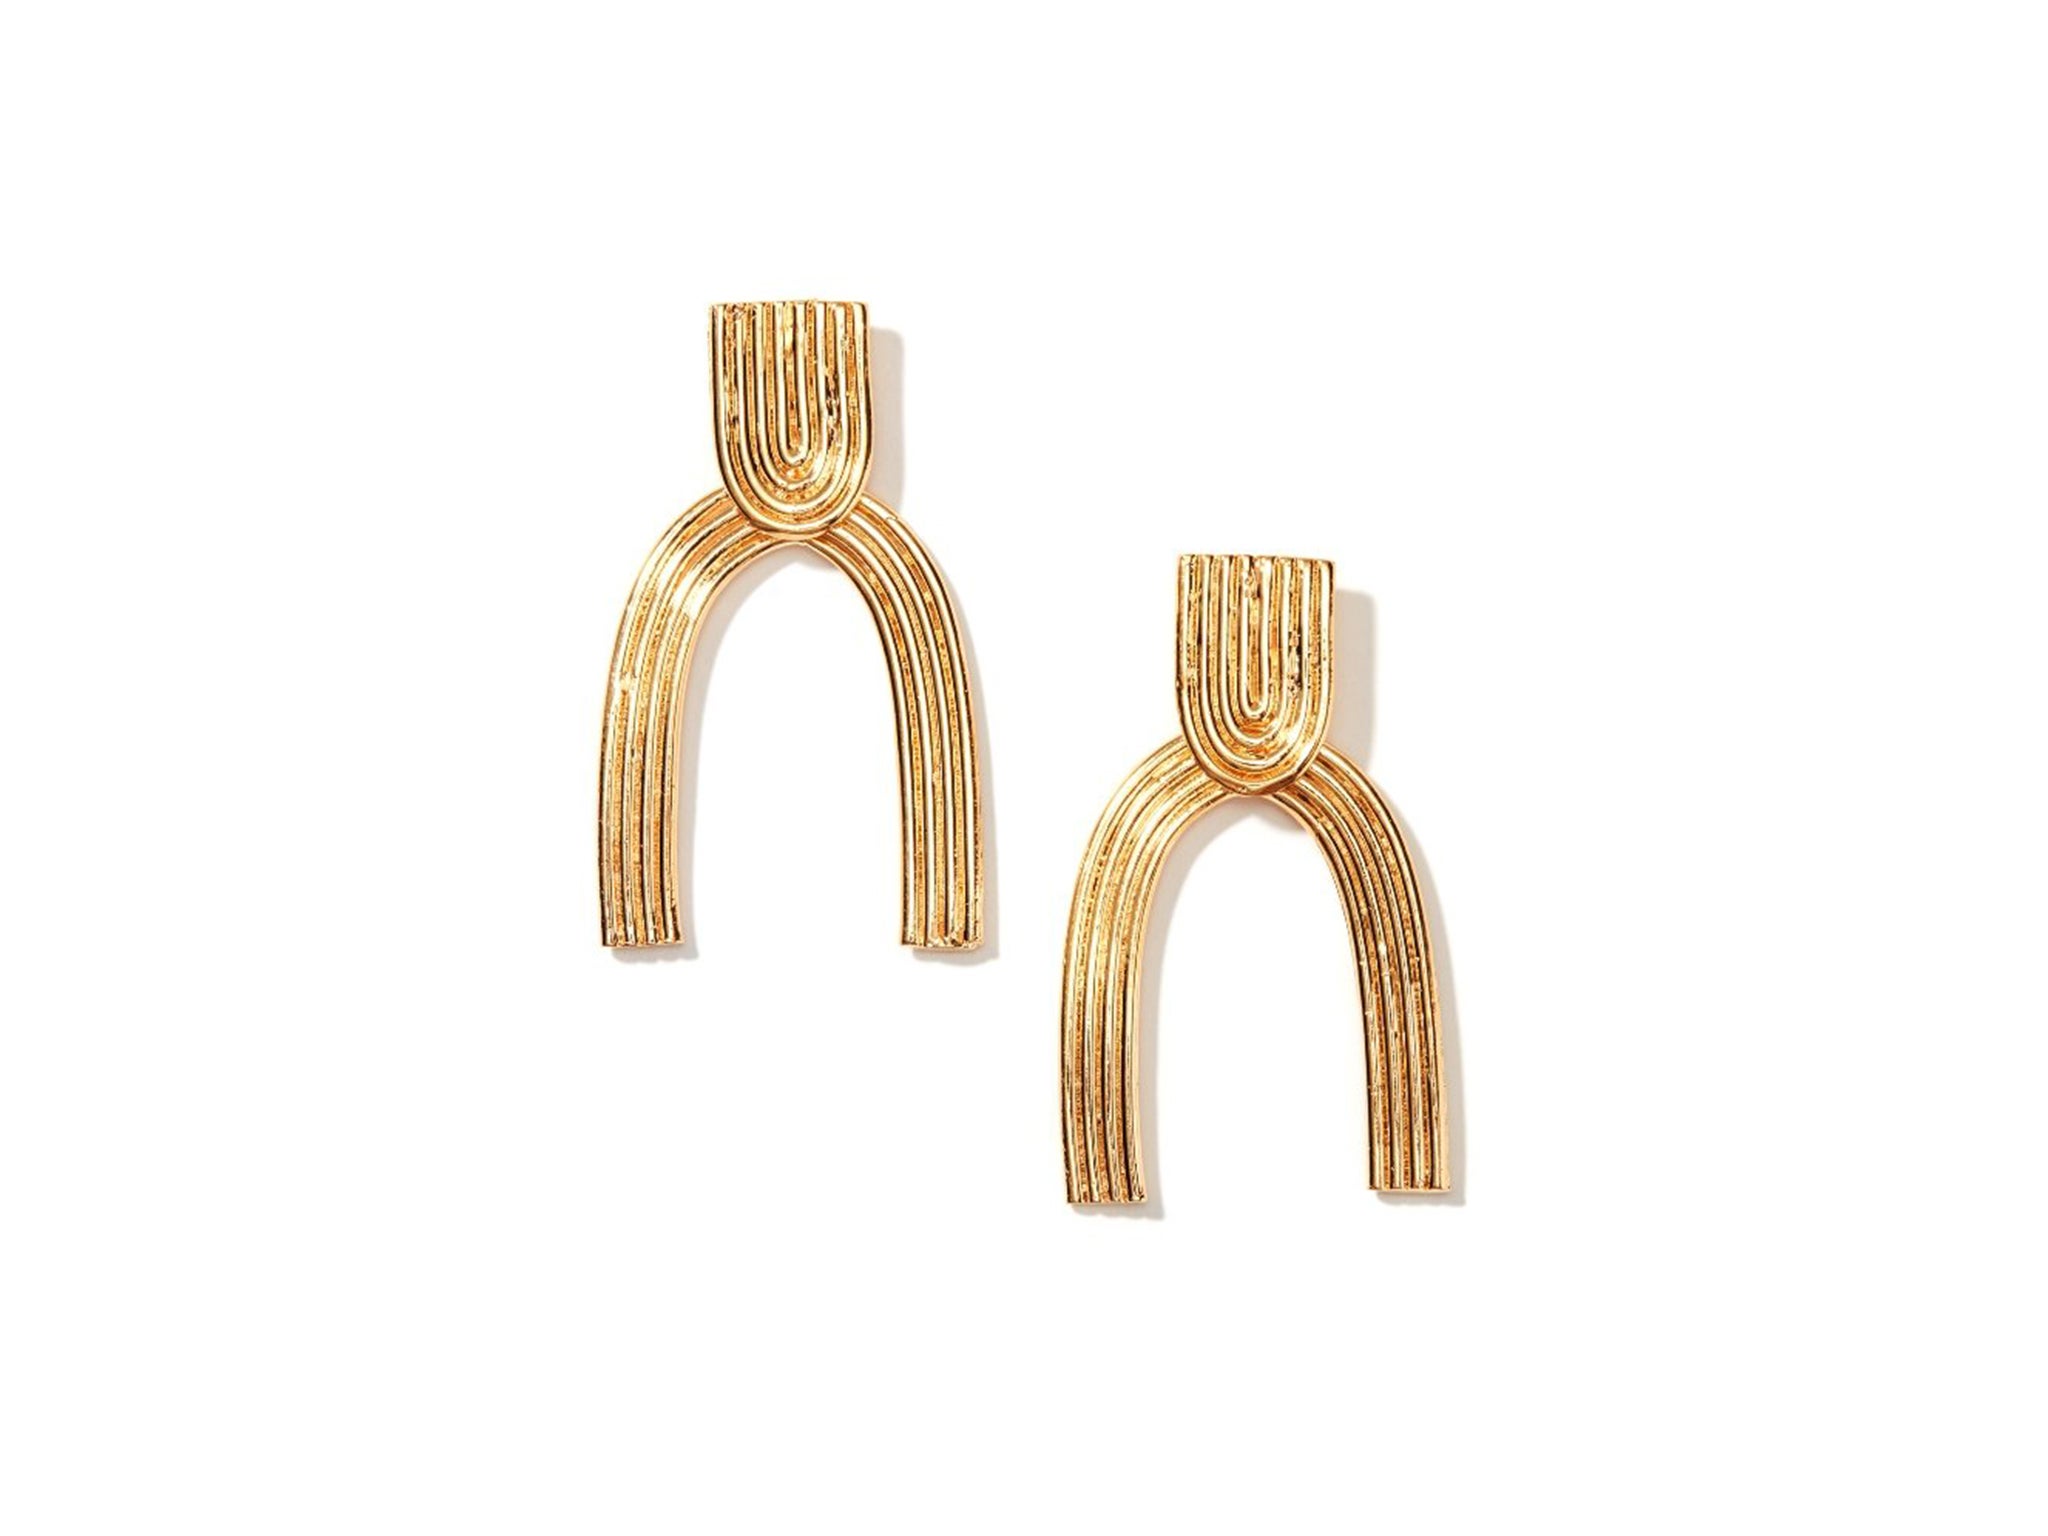 Update your jewellery game with this statement pair of earrings